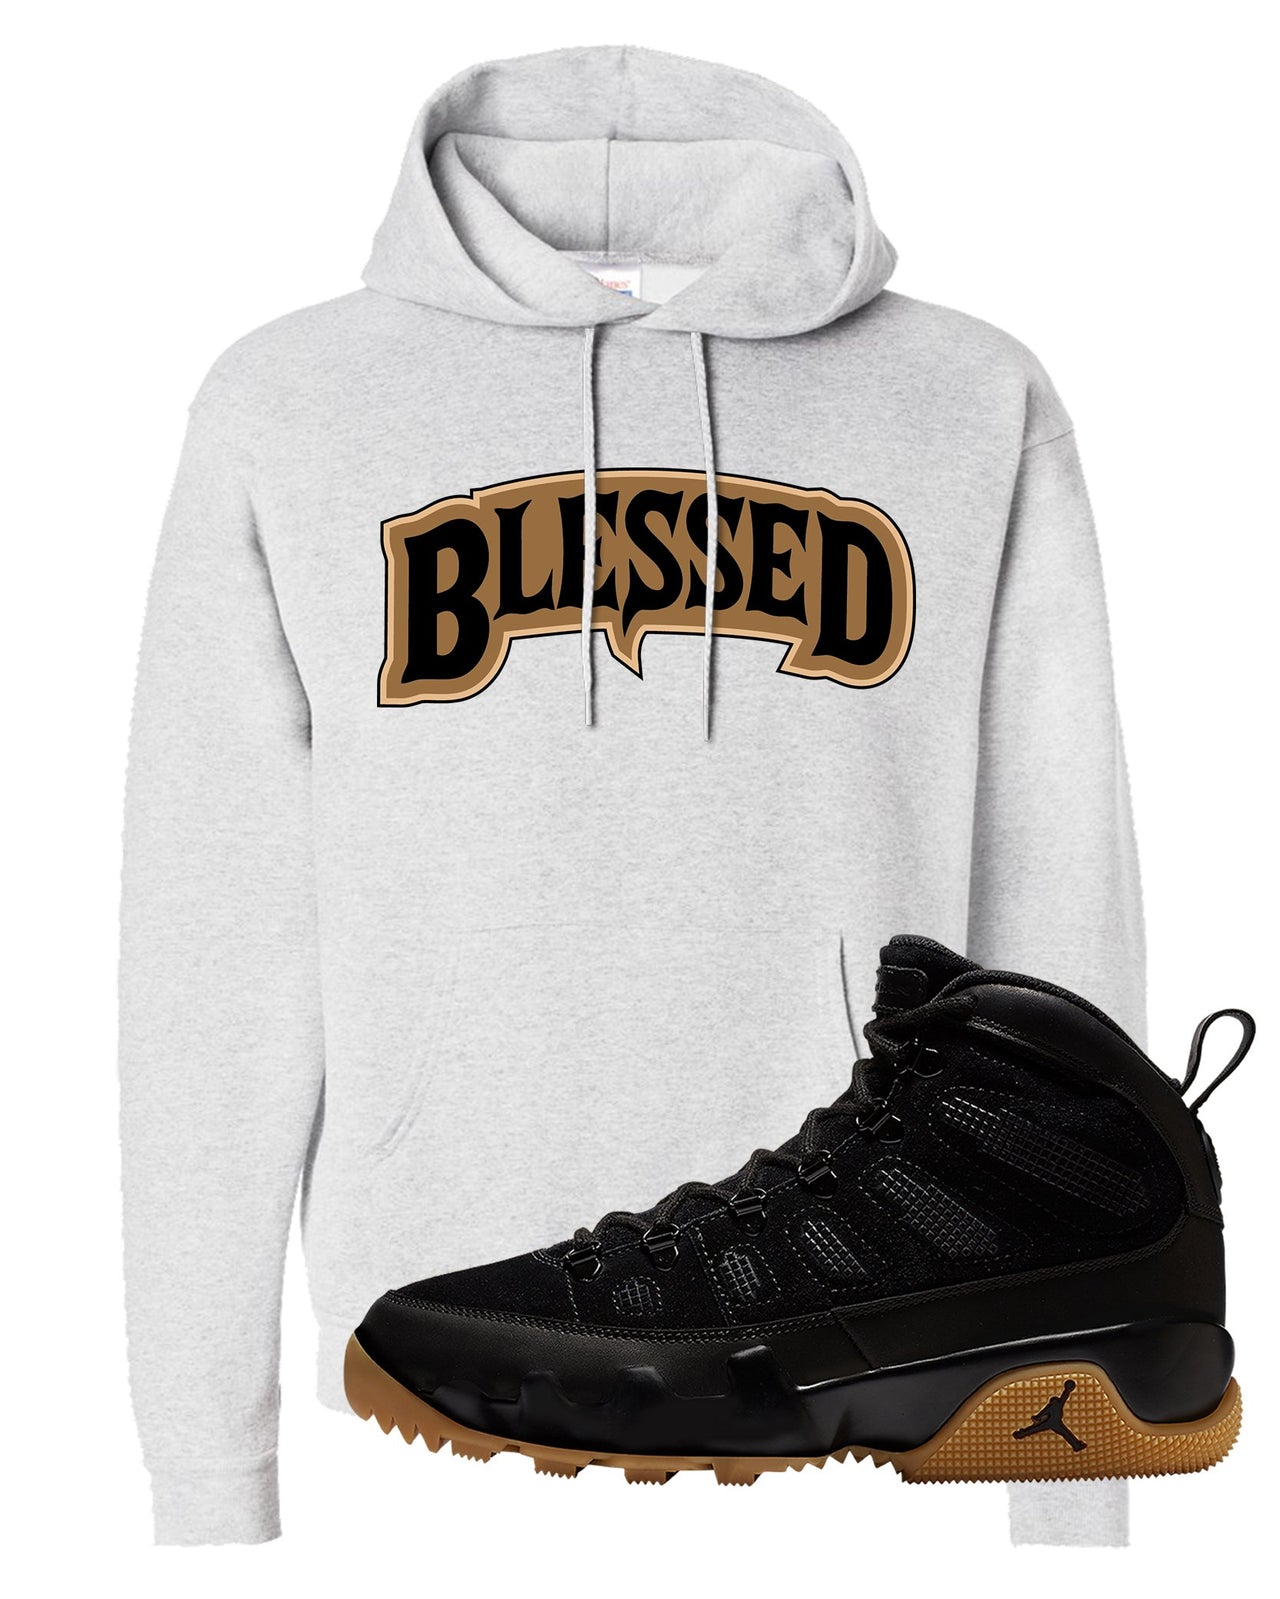 NRG Black Gum Boot 9s Hoodie | Blessed Arch, Ash